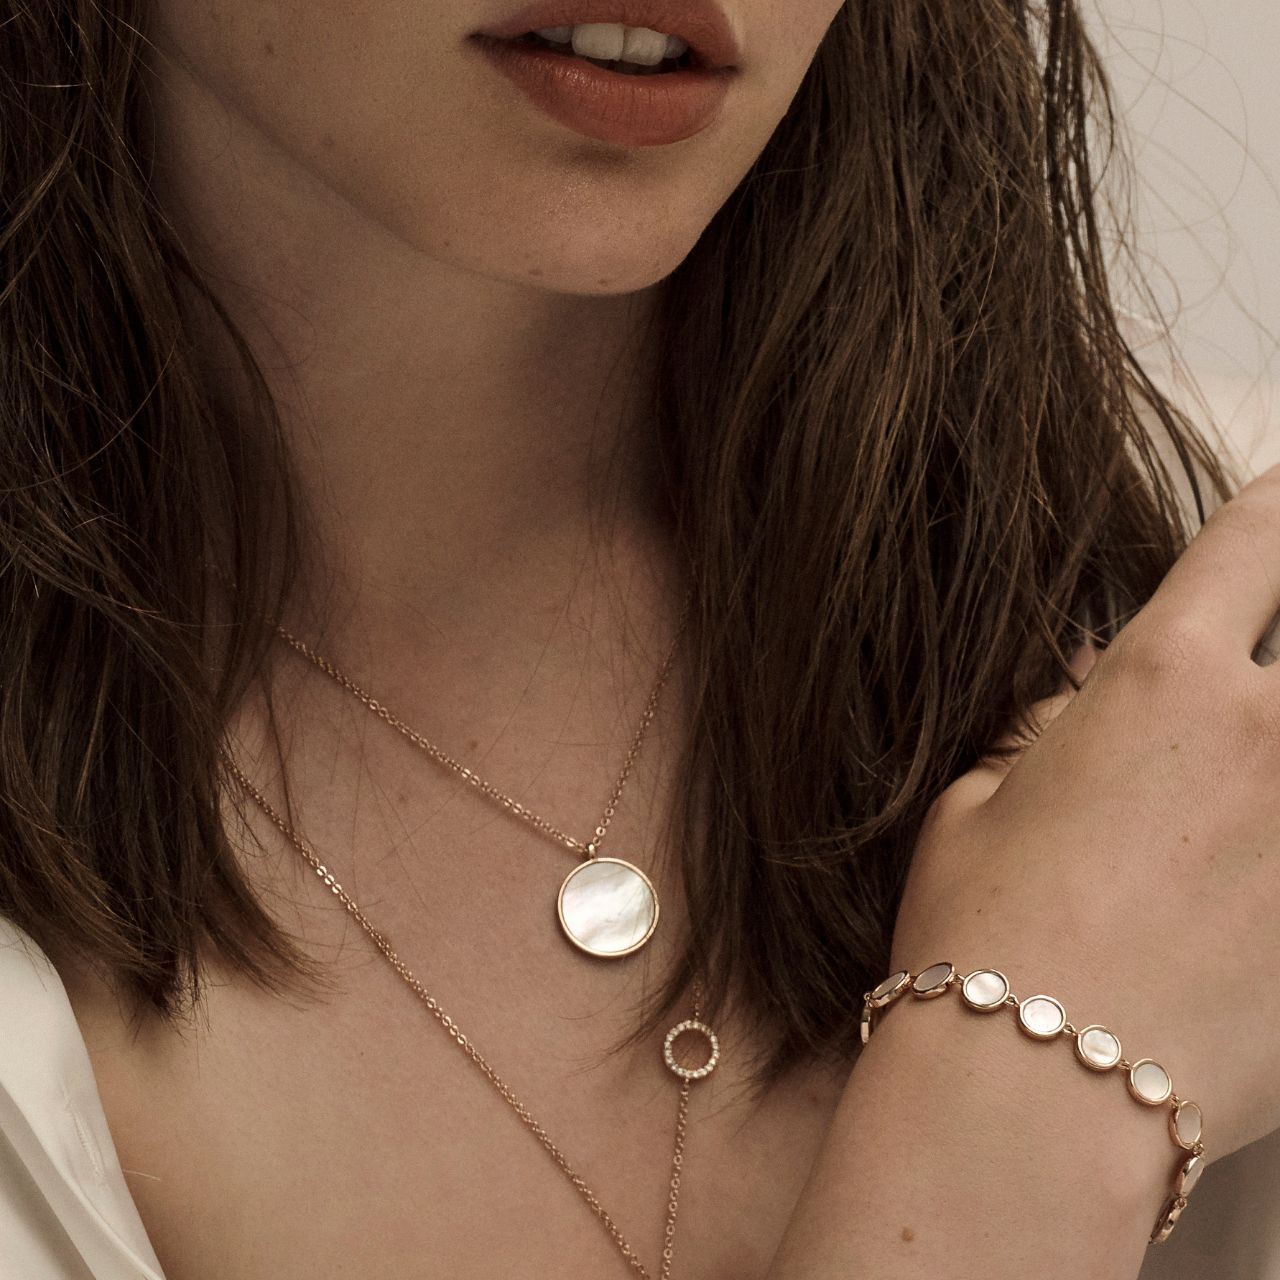 Mother Of Pearl Full Moon Bracelet by Tipperary  This Bracelet is crafted from Rose gold and features fourteen perfectly round discs with a Mother of Pear inlay, this bracelet closes with a lobster clip and is finished with a TC Fob.